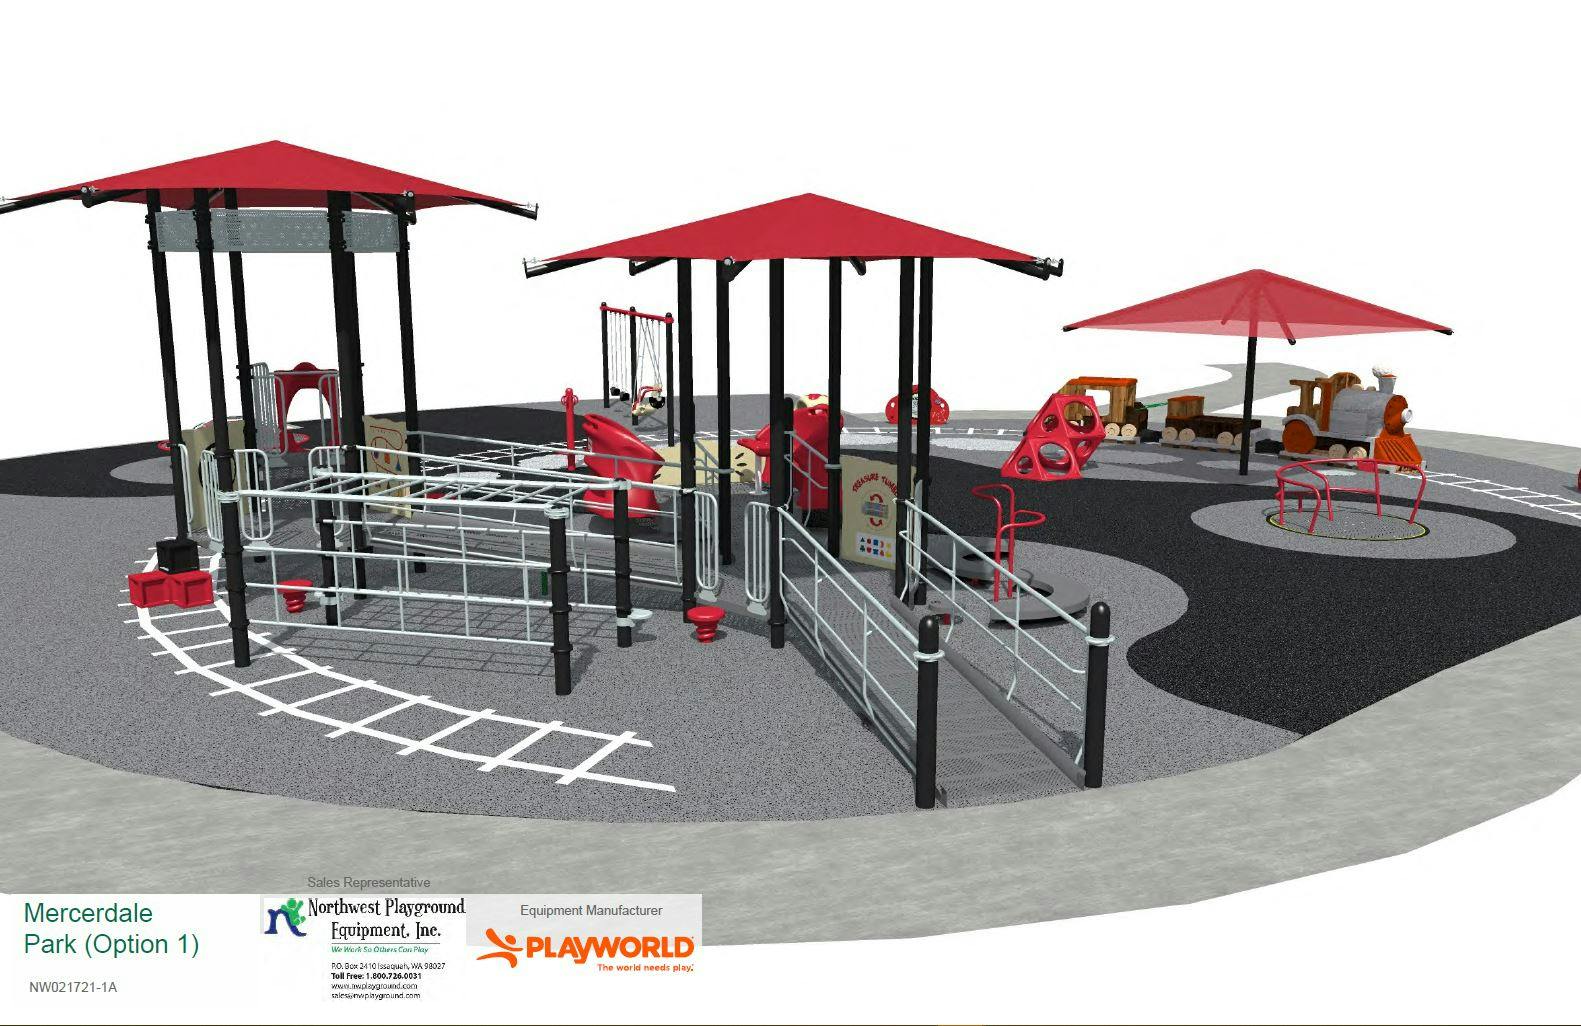 Proposed Playground Replacement - Rendering #2